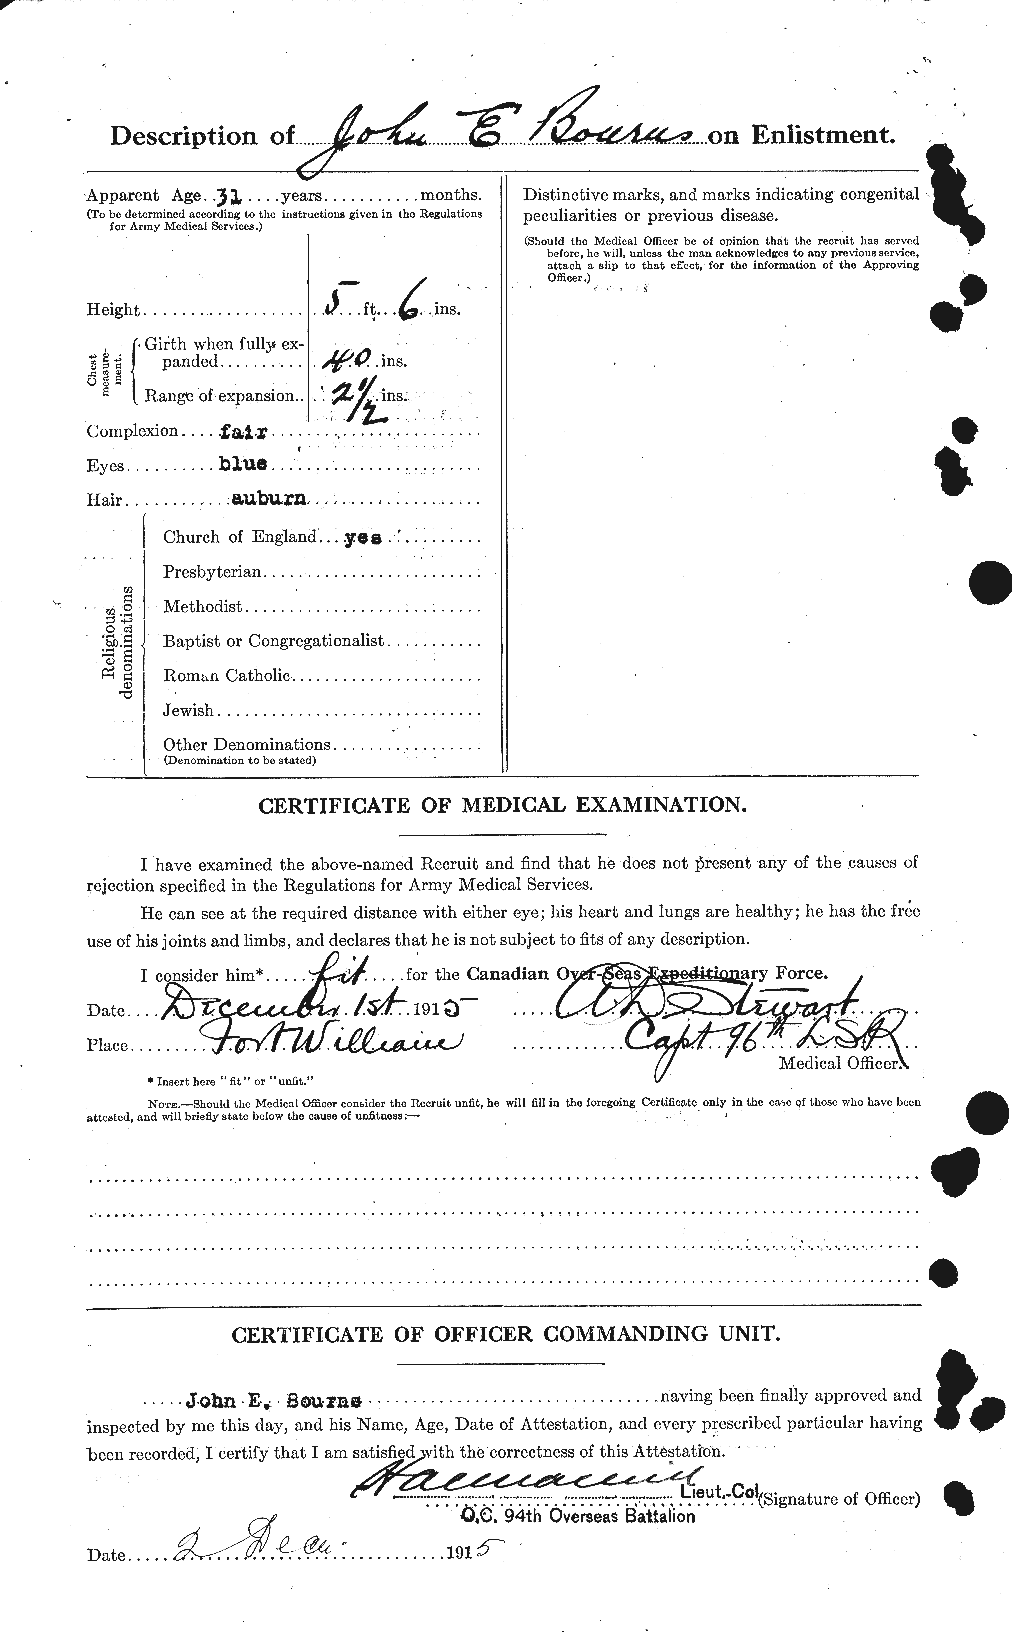 Personnel Records of the First World War - CEF 254174b